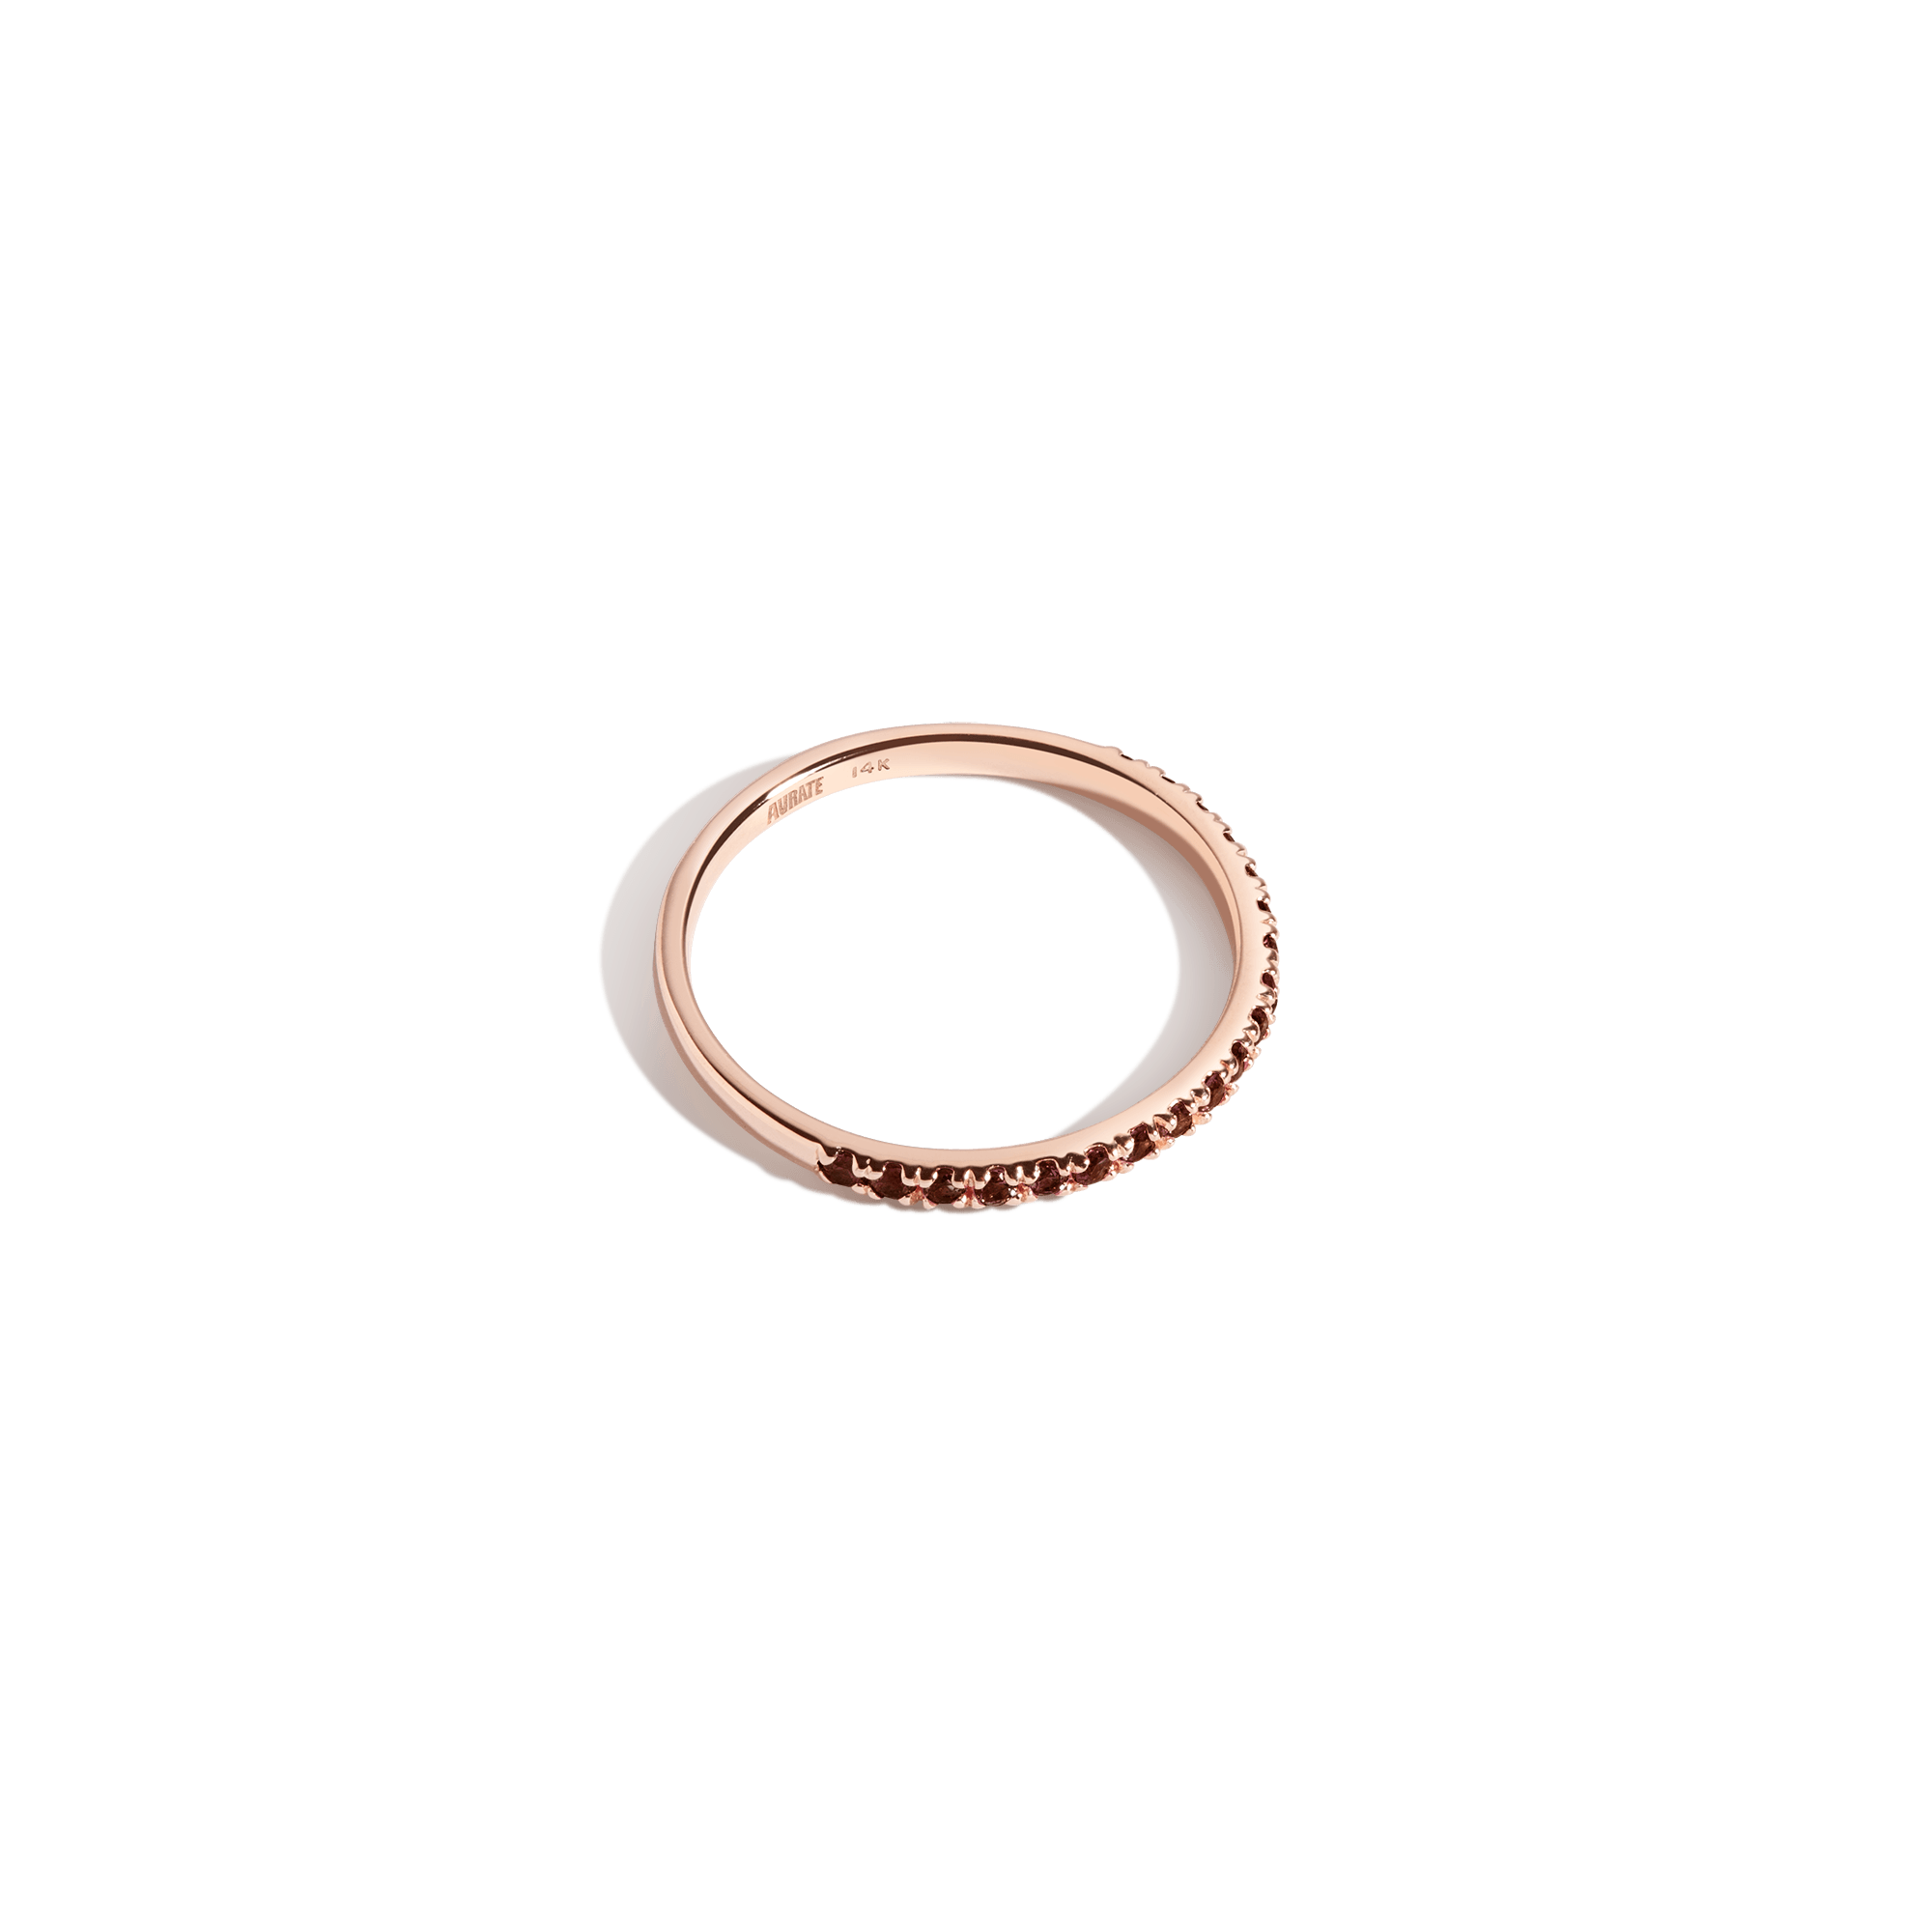 Half Quadricolor Ring in Yellow, Rose or White Gold